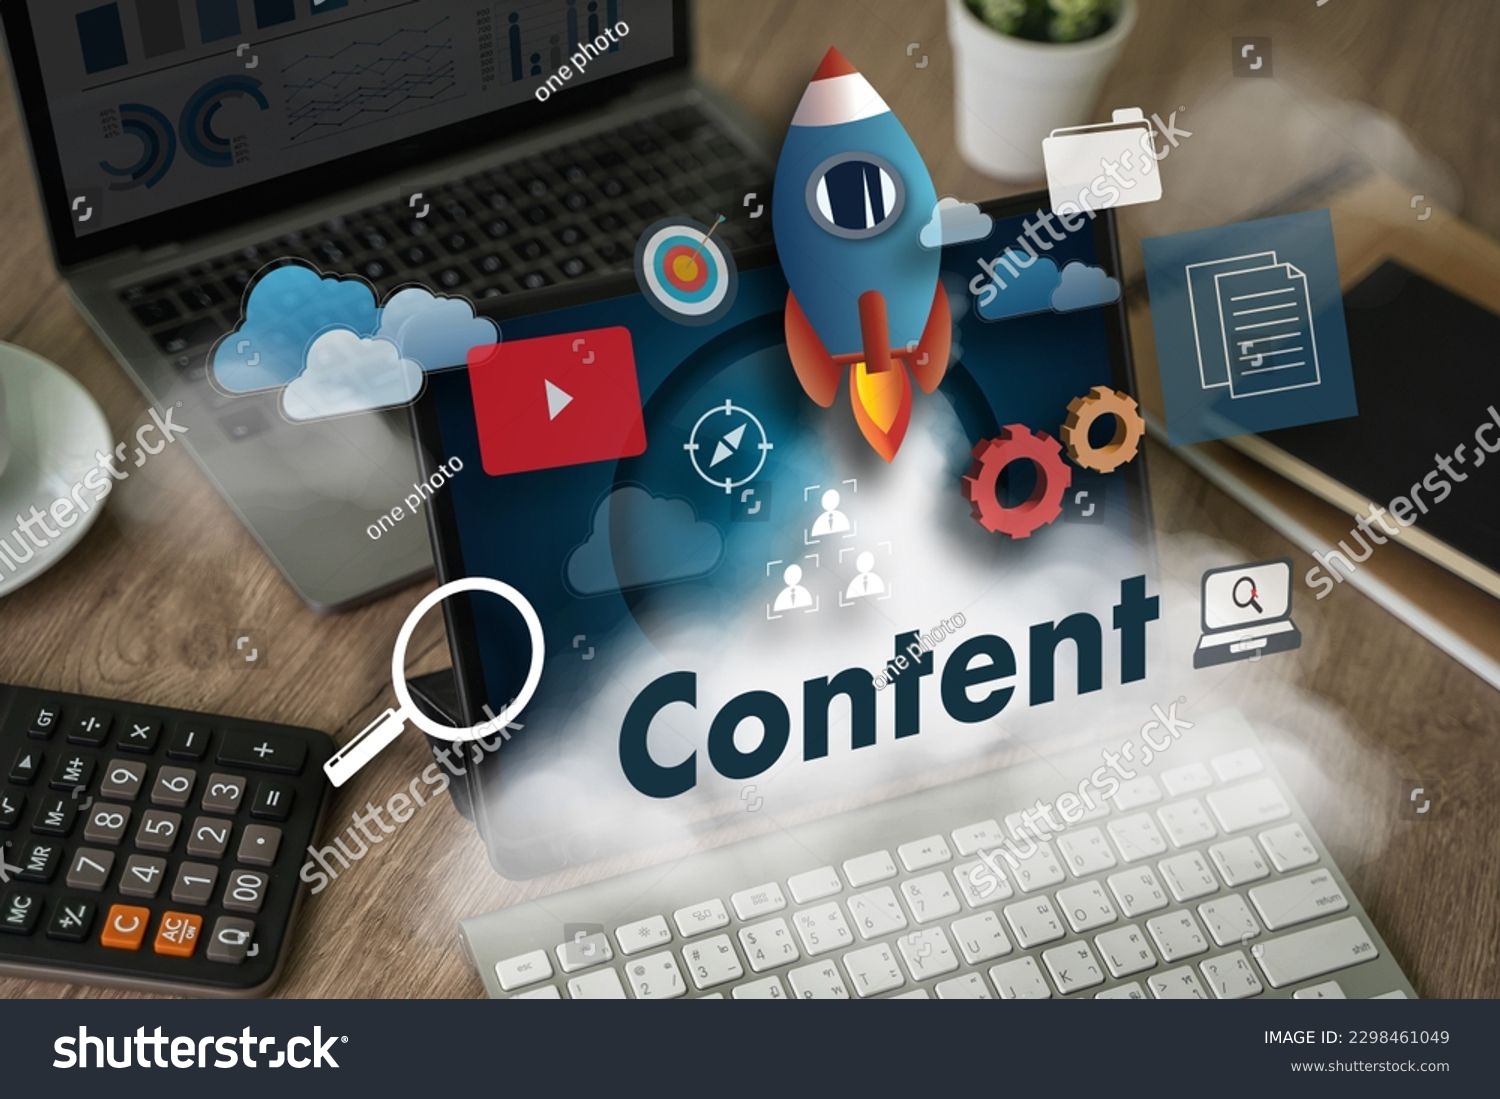 content marketing Content Data Blogging Media Publication Information Vision Concept Social Business Internet Strategy Advertising SEO #2298461049